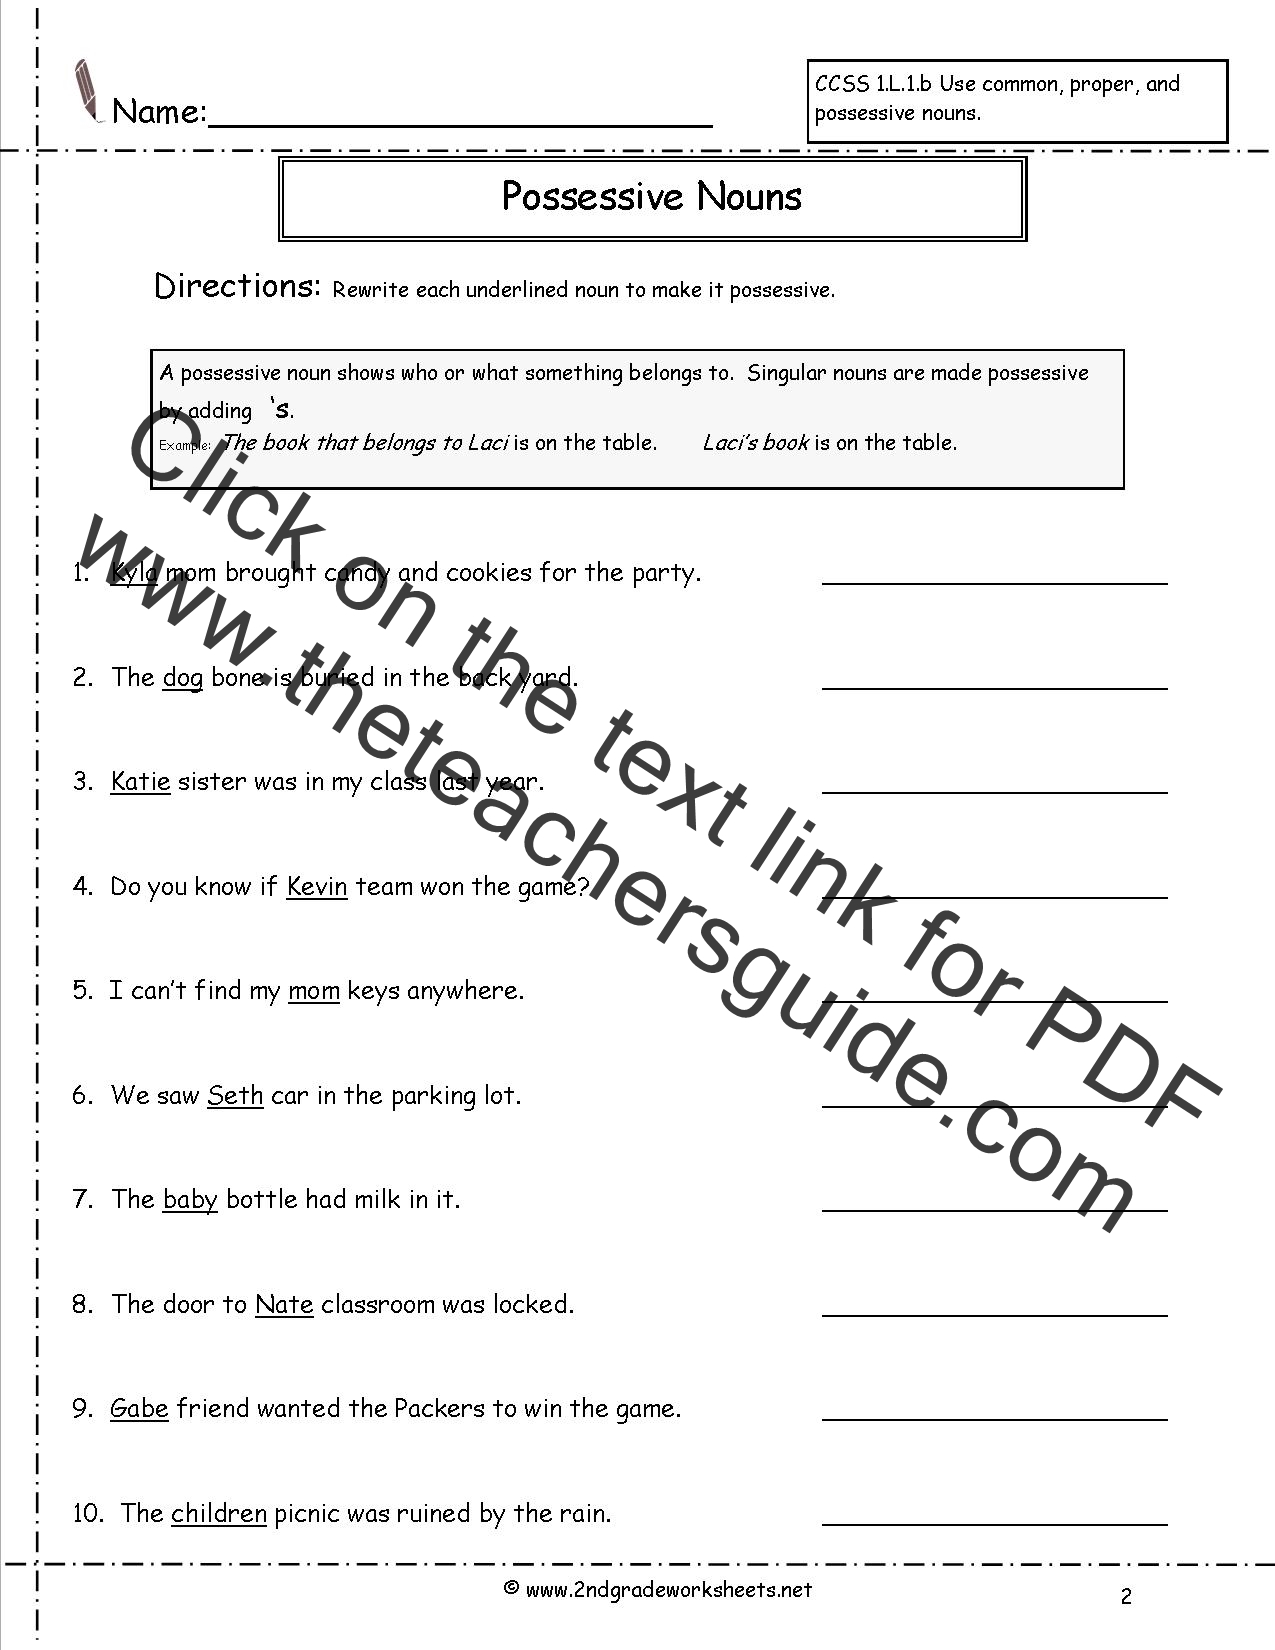 Possessive Nouns Worksheet With Answers